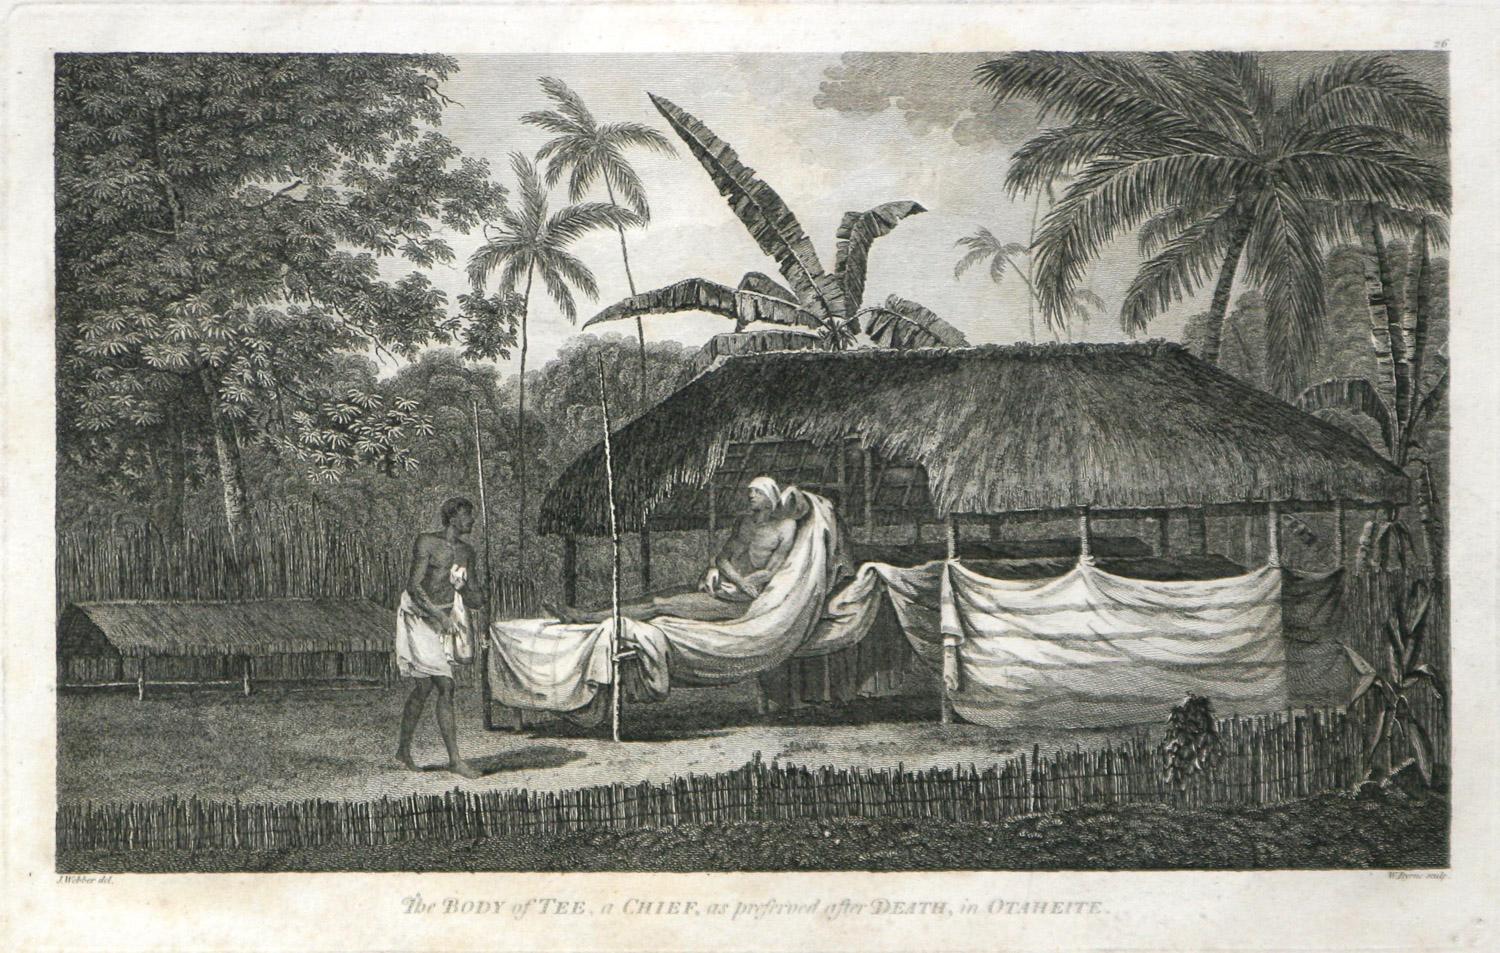 John Webber Landscape Print - The Body of Tee, a Chief, as preferred after Death, in Otaheite (Tahiti) 